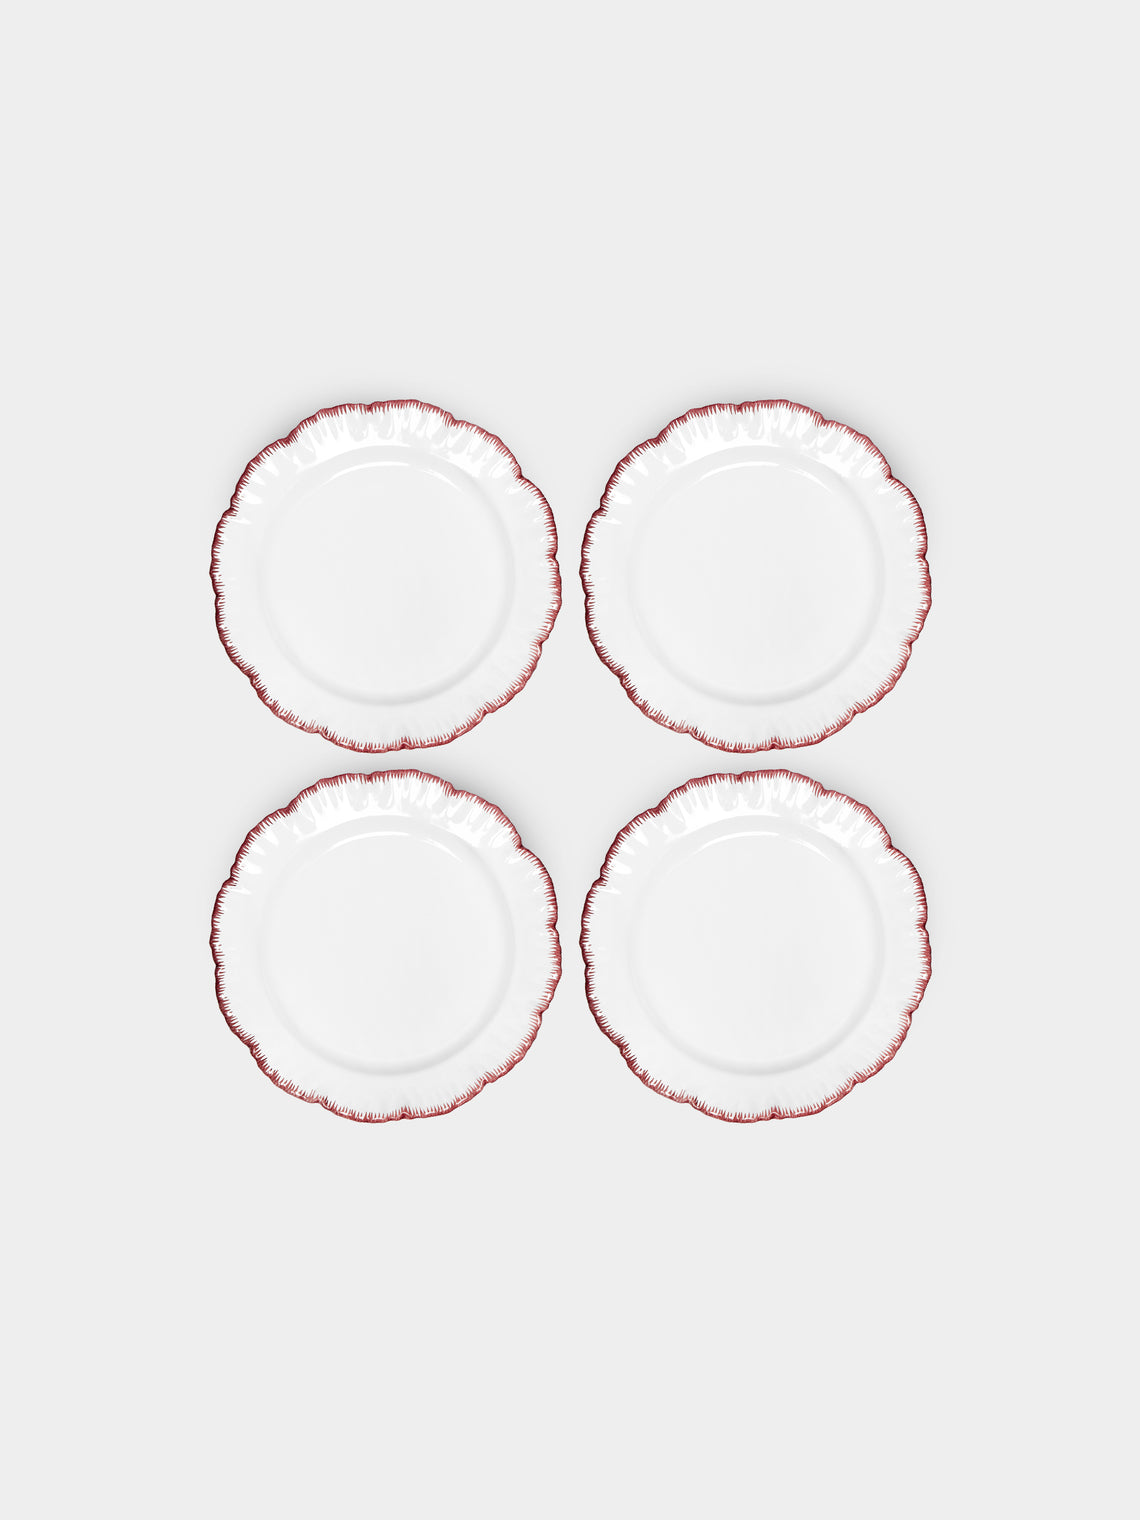 Atelier Soleil - Combed Edge Hand-Painted Ceramic Side Plates (Set of 4) -  - ABASK